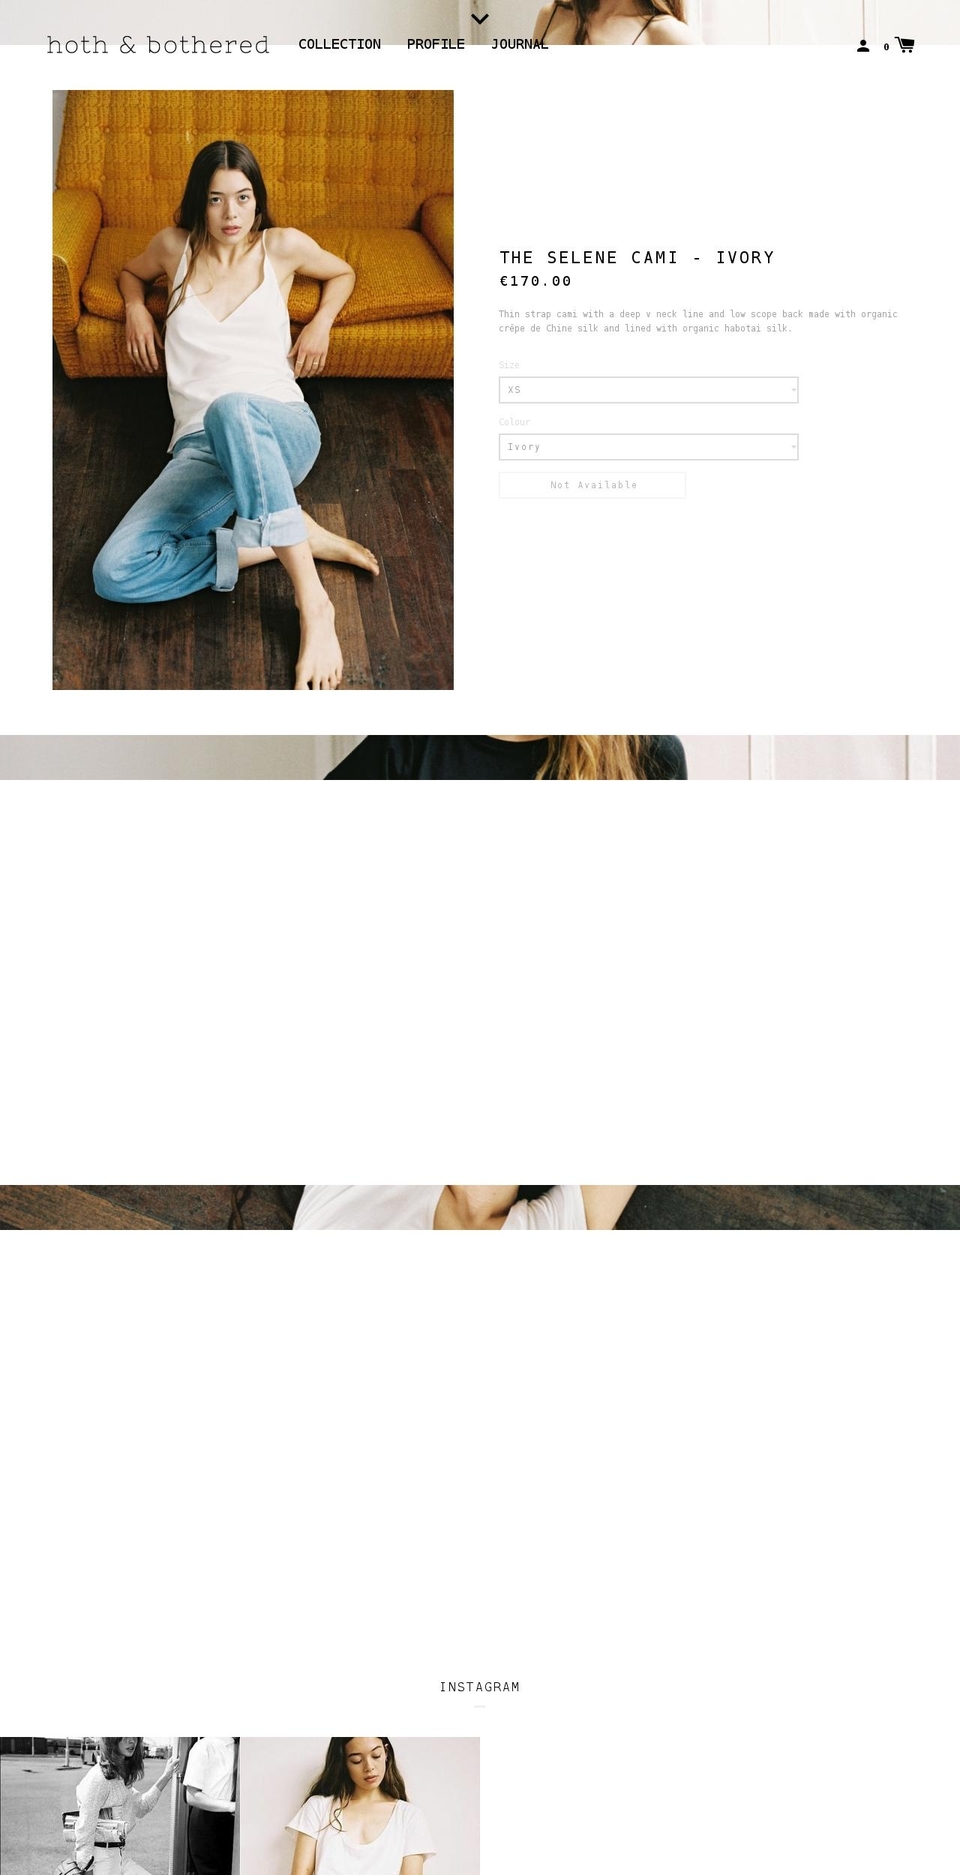 Label Shopify theme site example hothandbothered.com